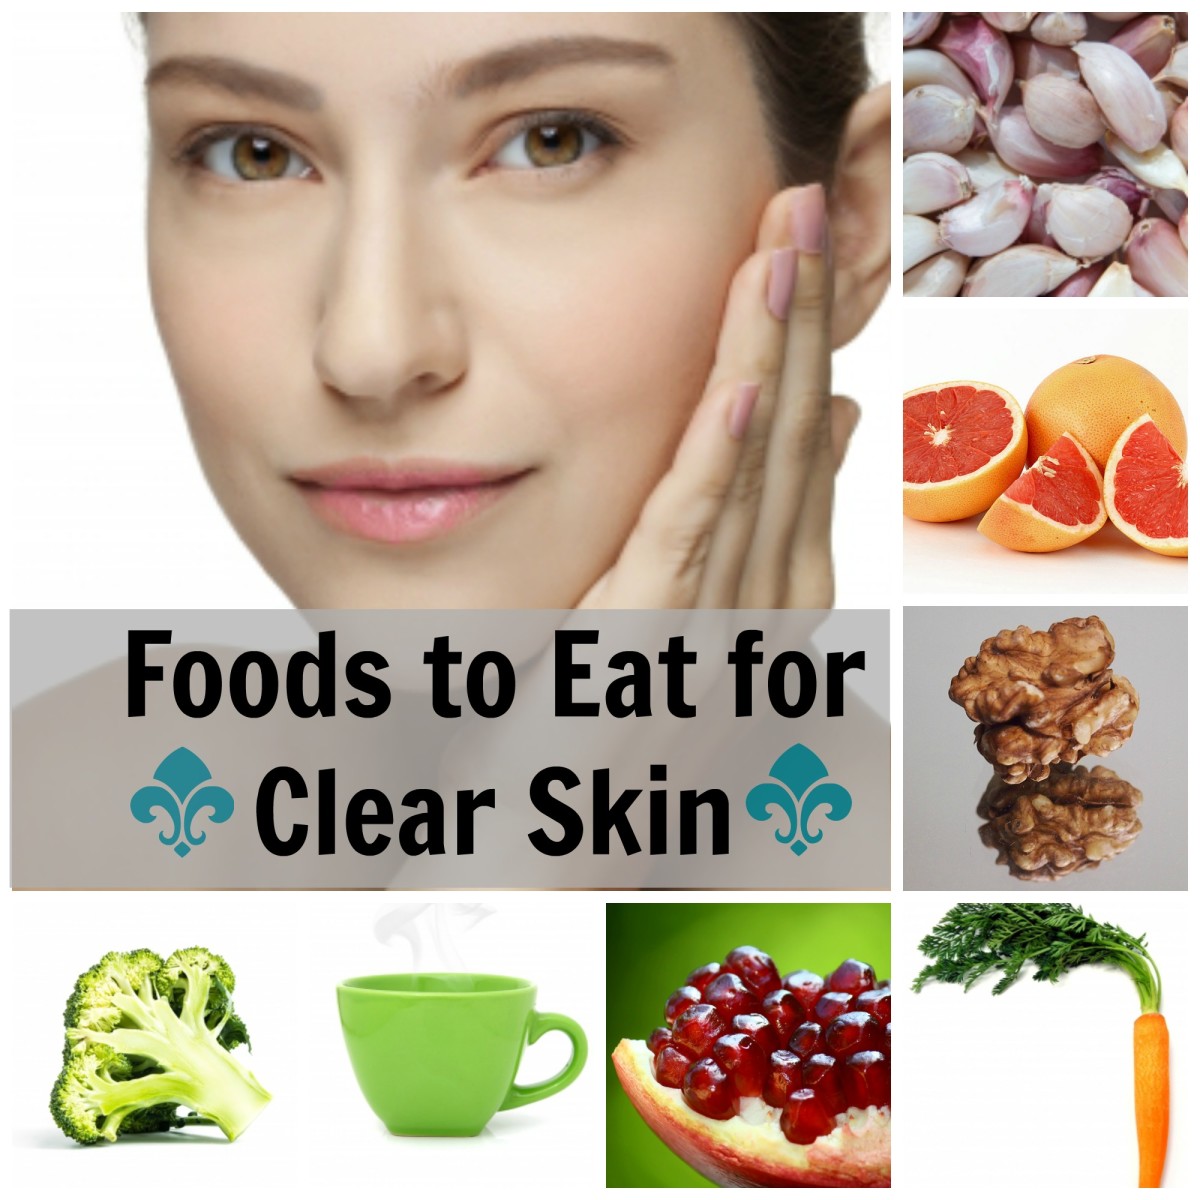 What are some vitamins that help give you clear skin?